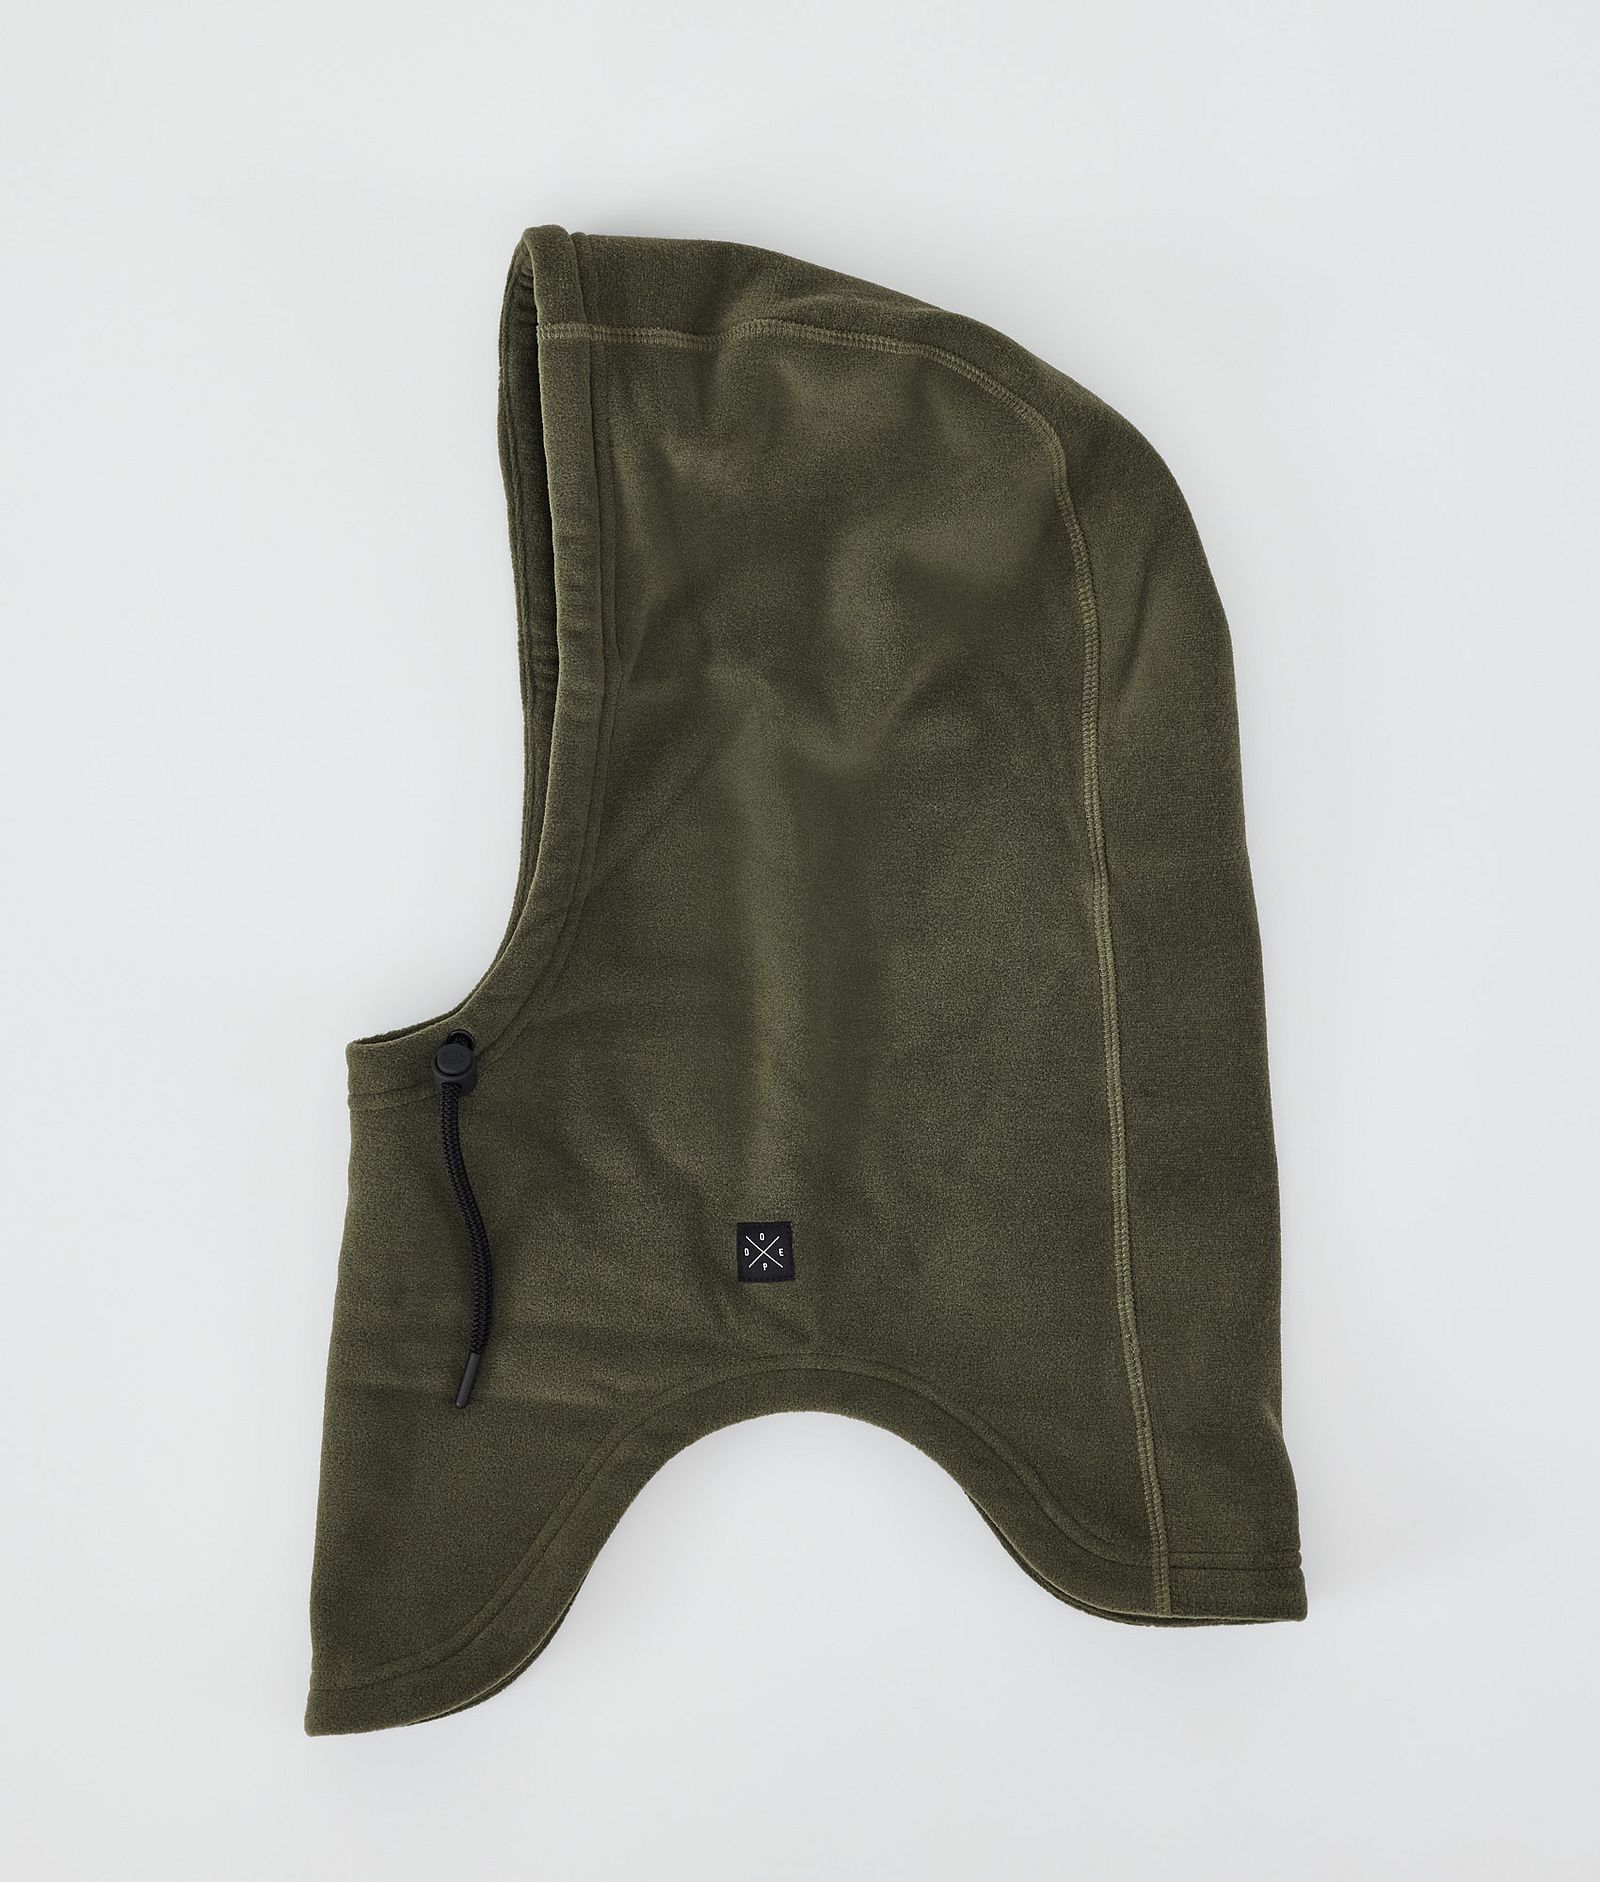 Cozy Hood II Facemask Olive Green, Image 1 of 5